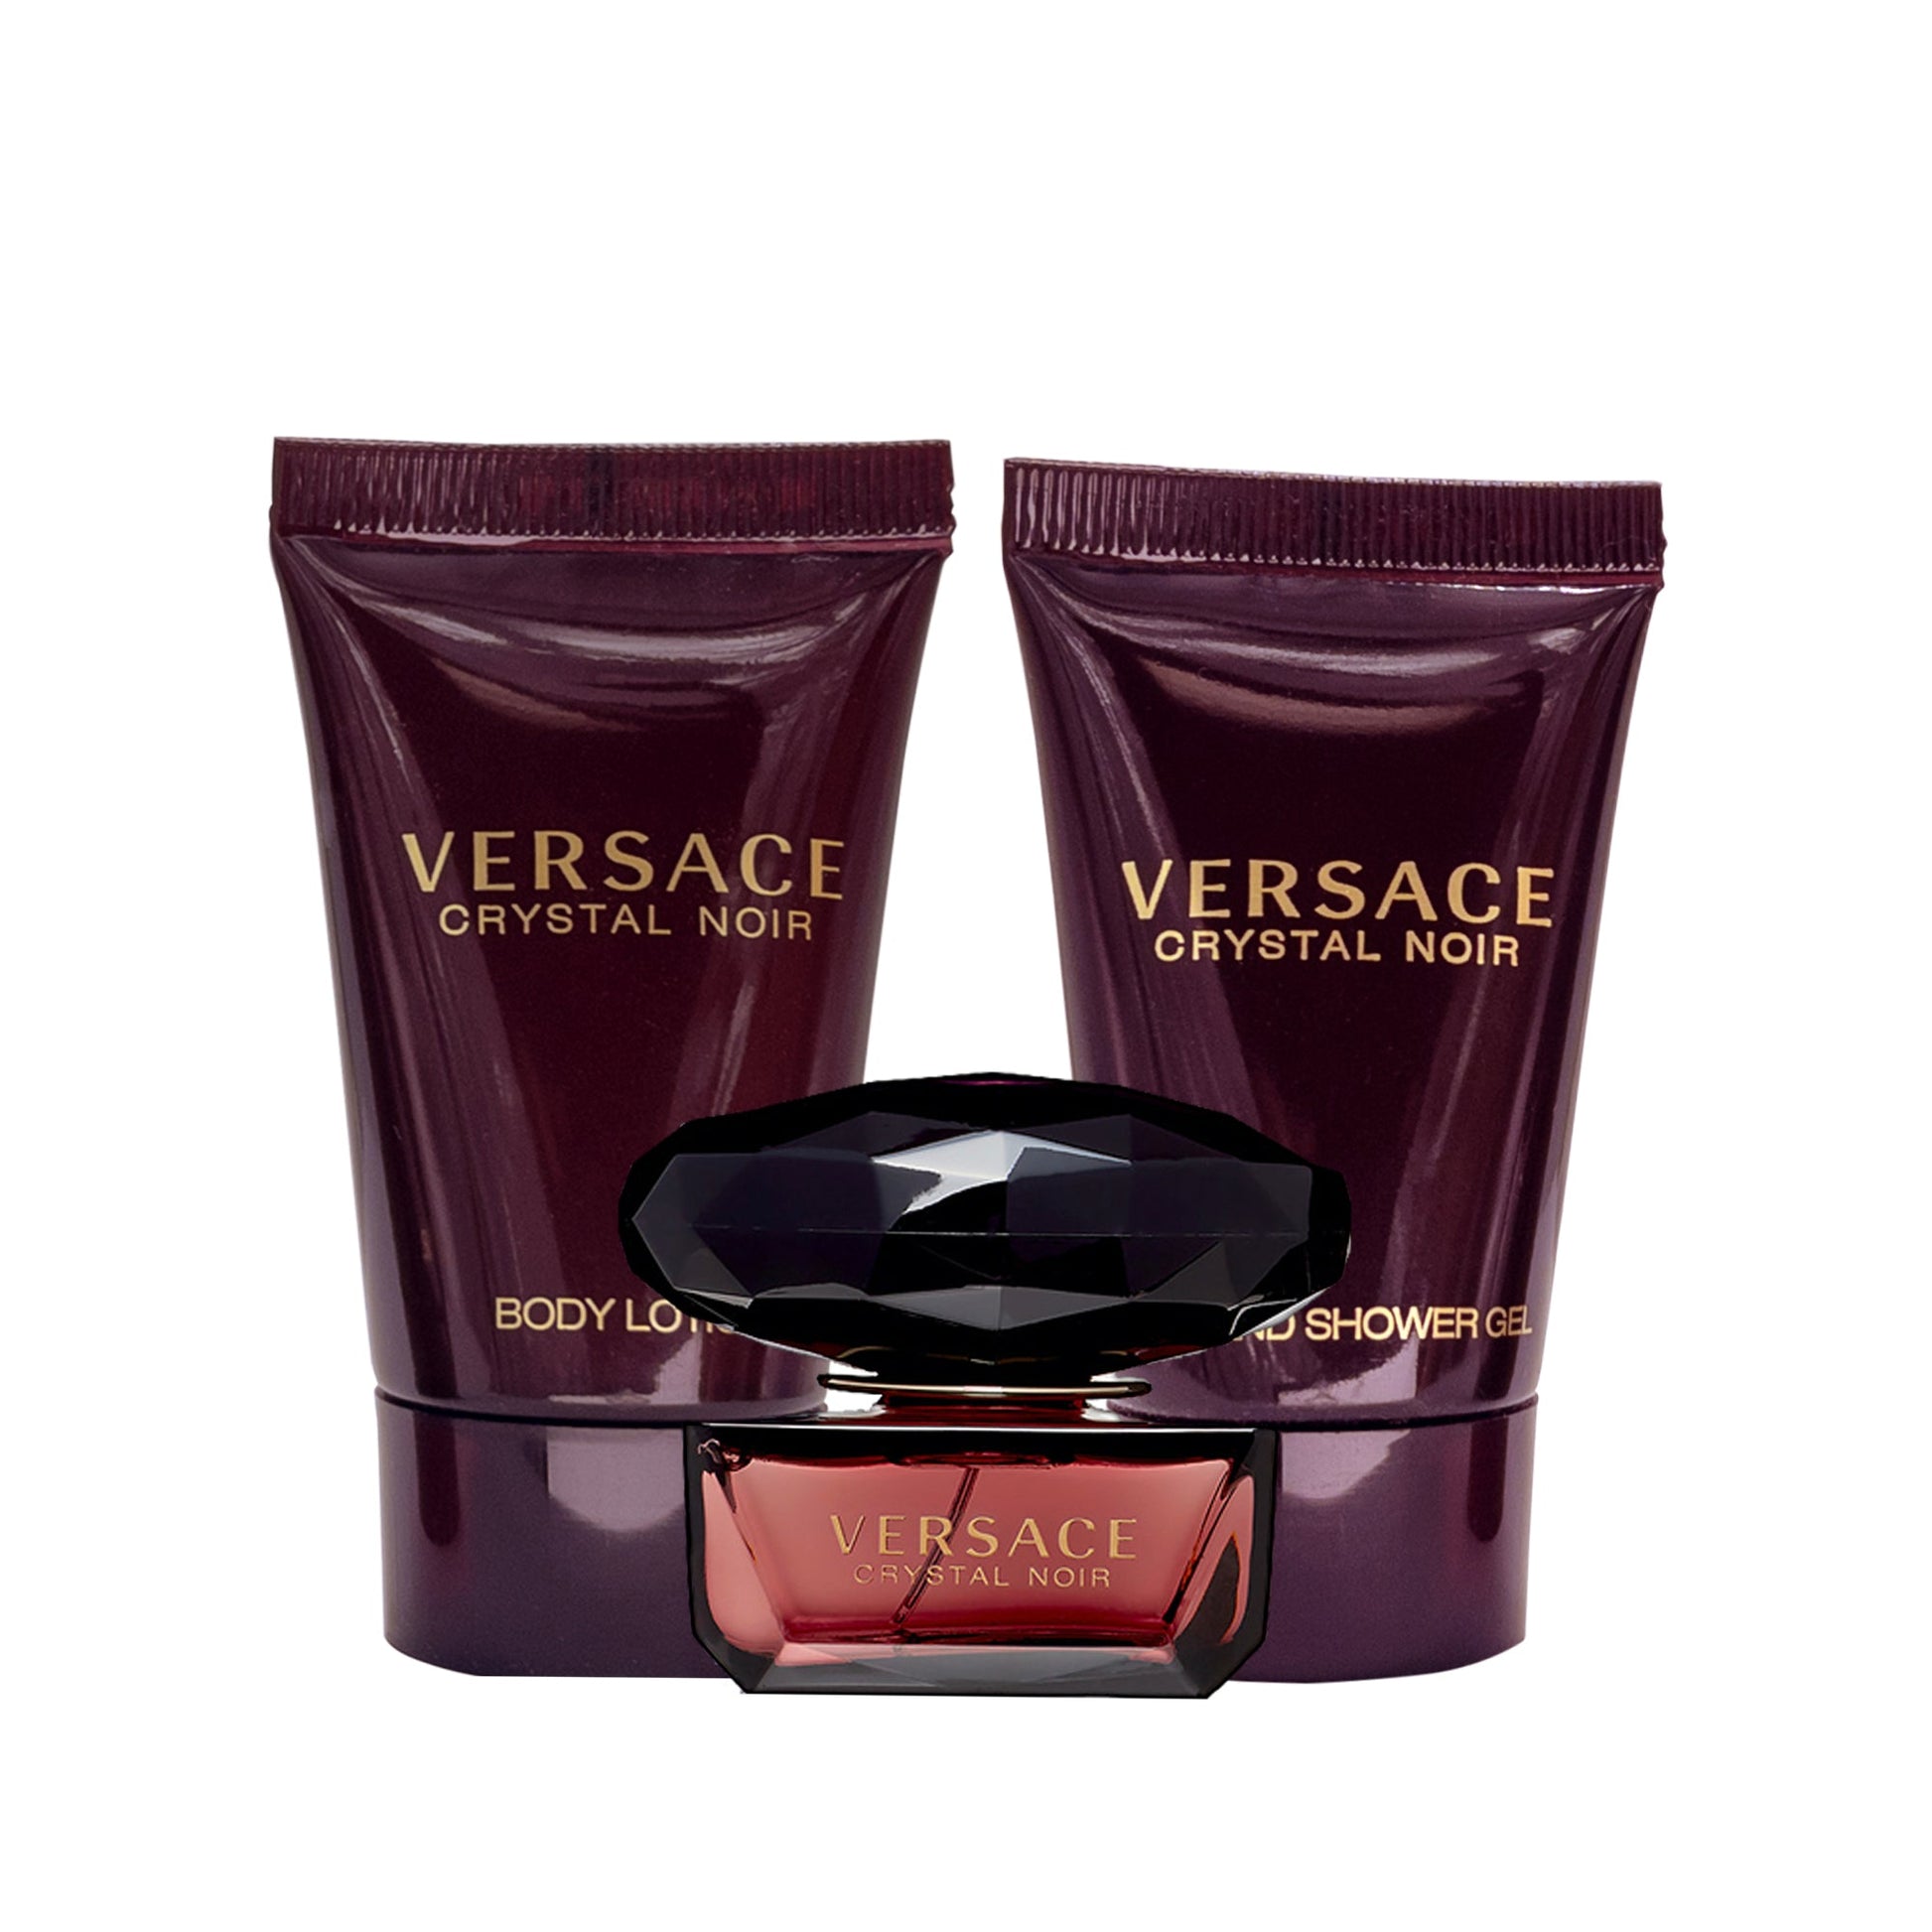 Versace Crystal Noir by Versace for Women - 3 Pc Mini Gift Set 5ml EDT Splash, 0.8oz Bath and Shower, Product image 2